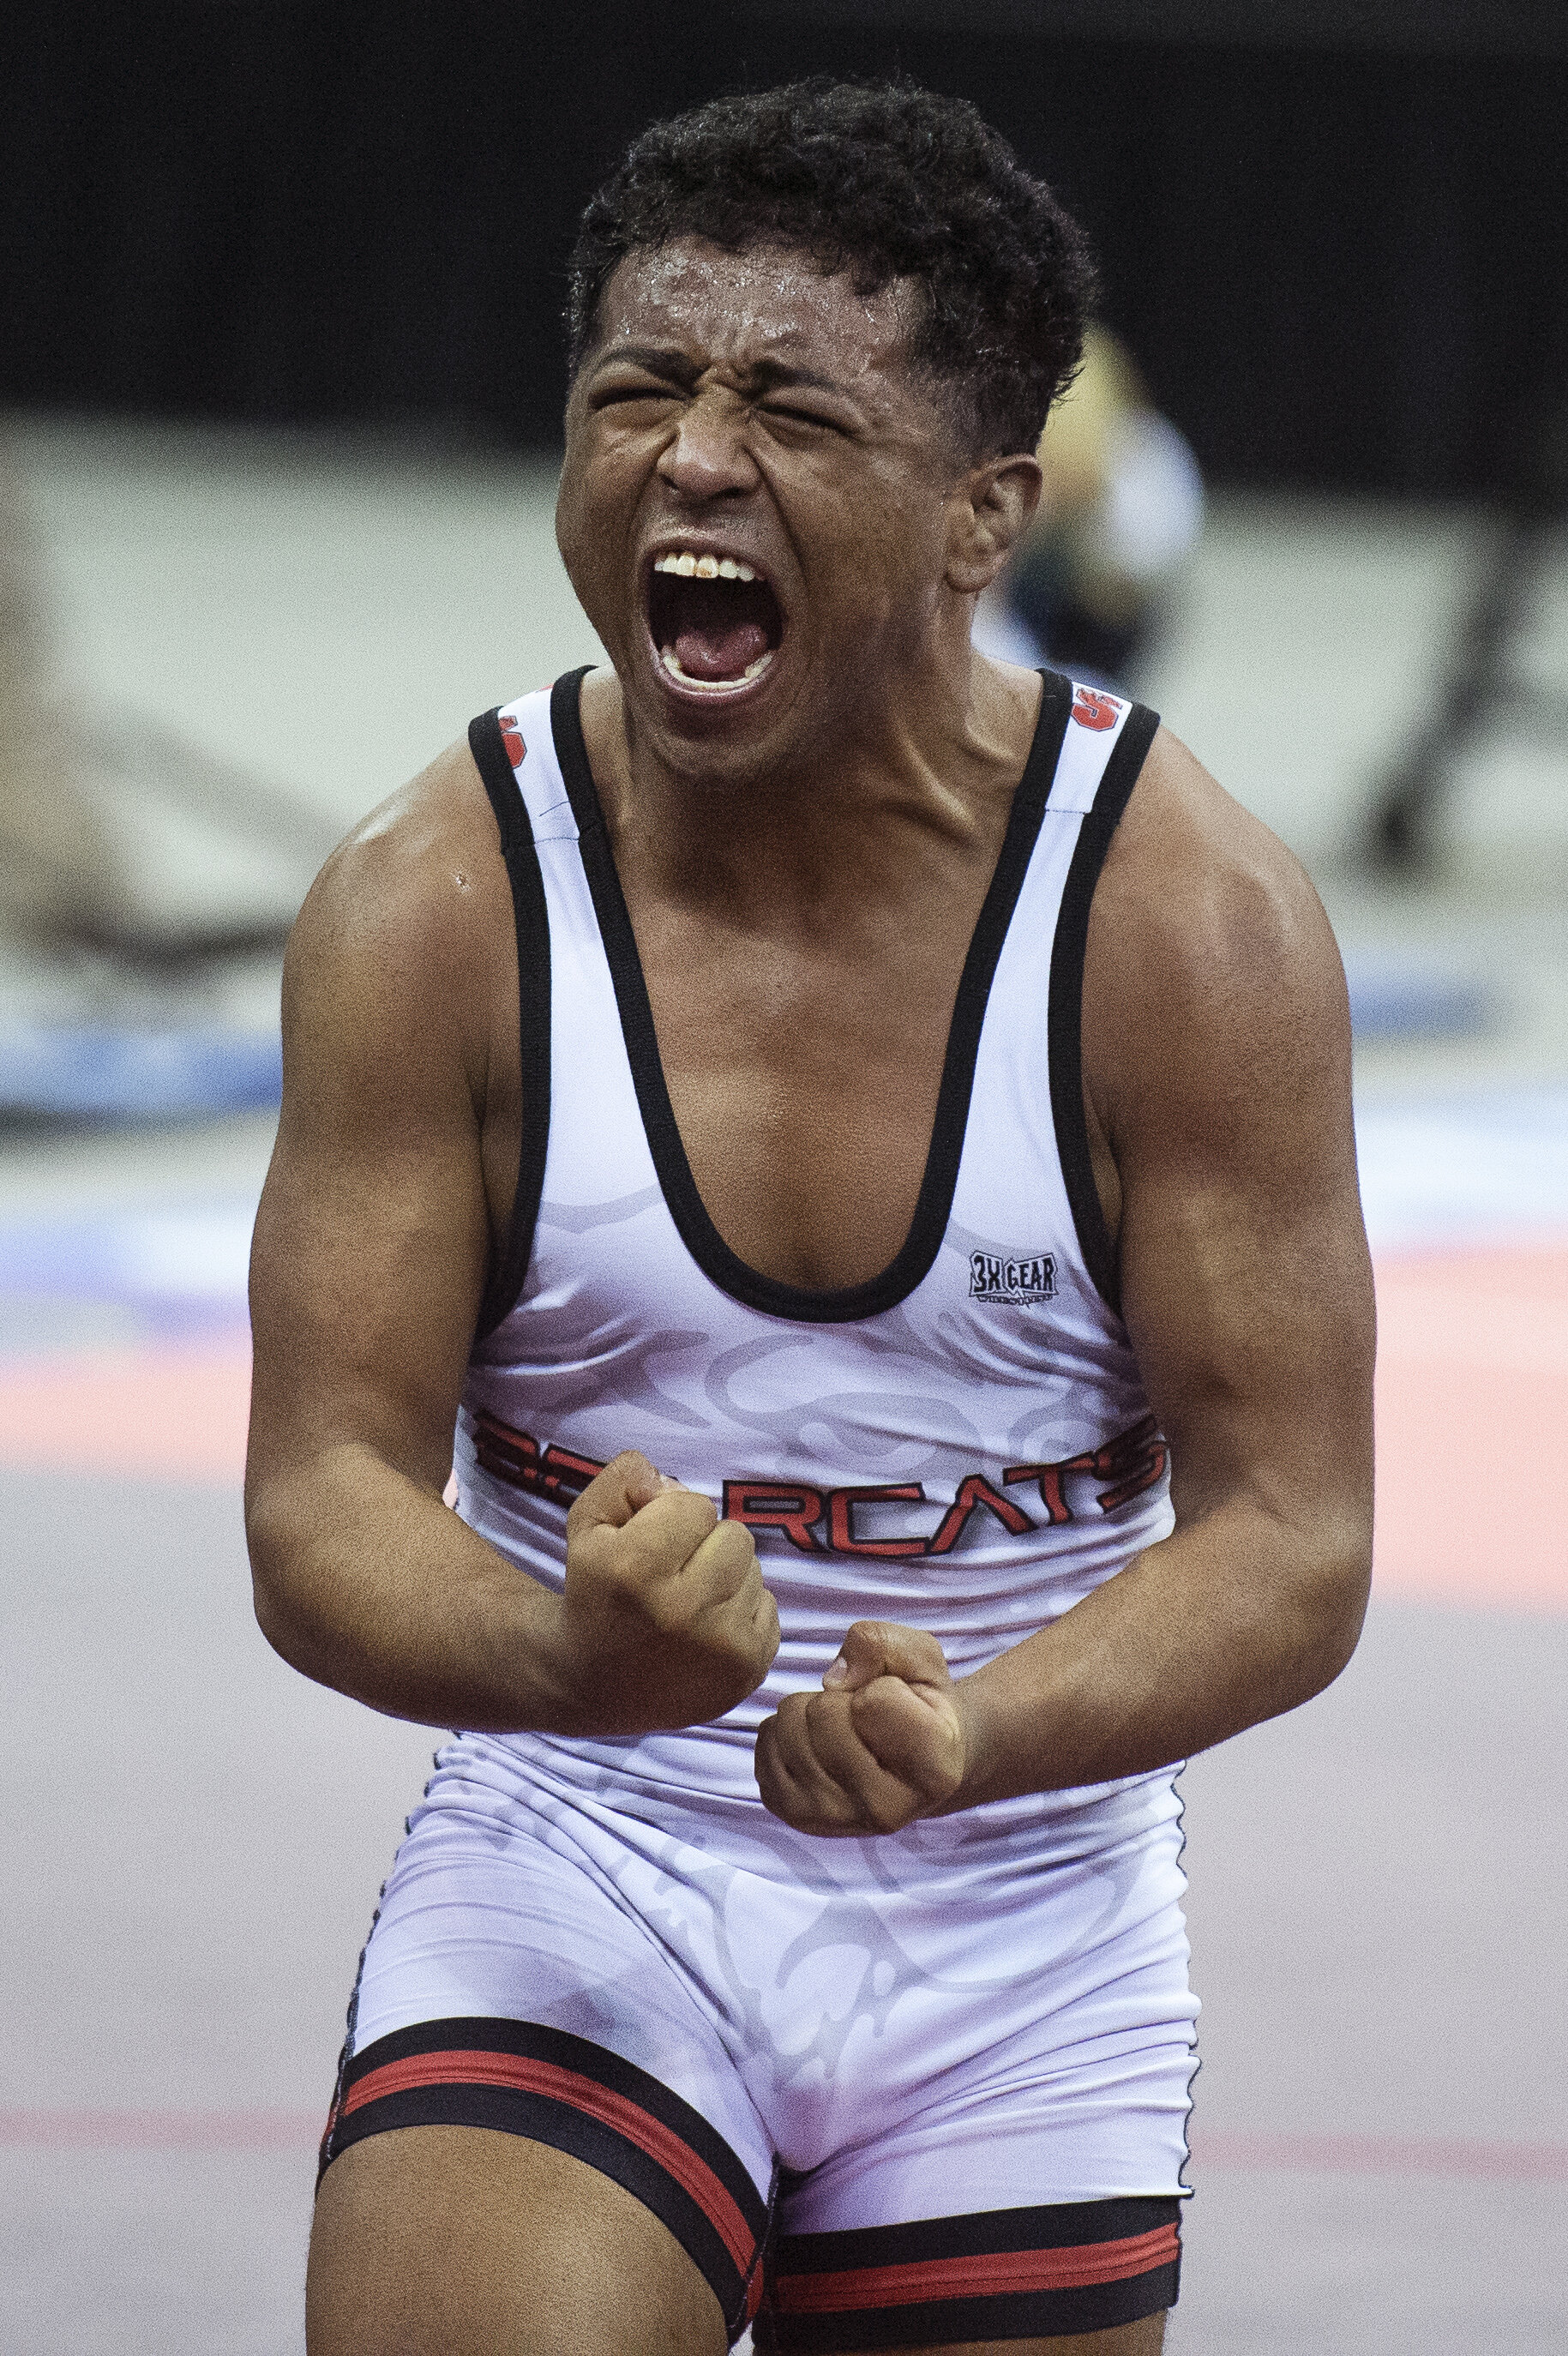  Scottsbluff’s Paul Garcia celebrates after defeating Gering’s Paul Ruff in the Class B 126 pound state championship match on February 20, 2021, in Omaha, Nebraska. At the sound of the whistle, Garcia let loose a yell. He had just entered the hallowe